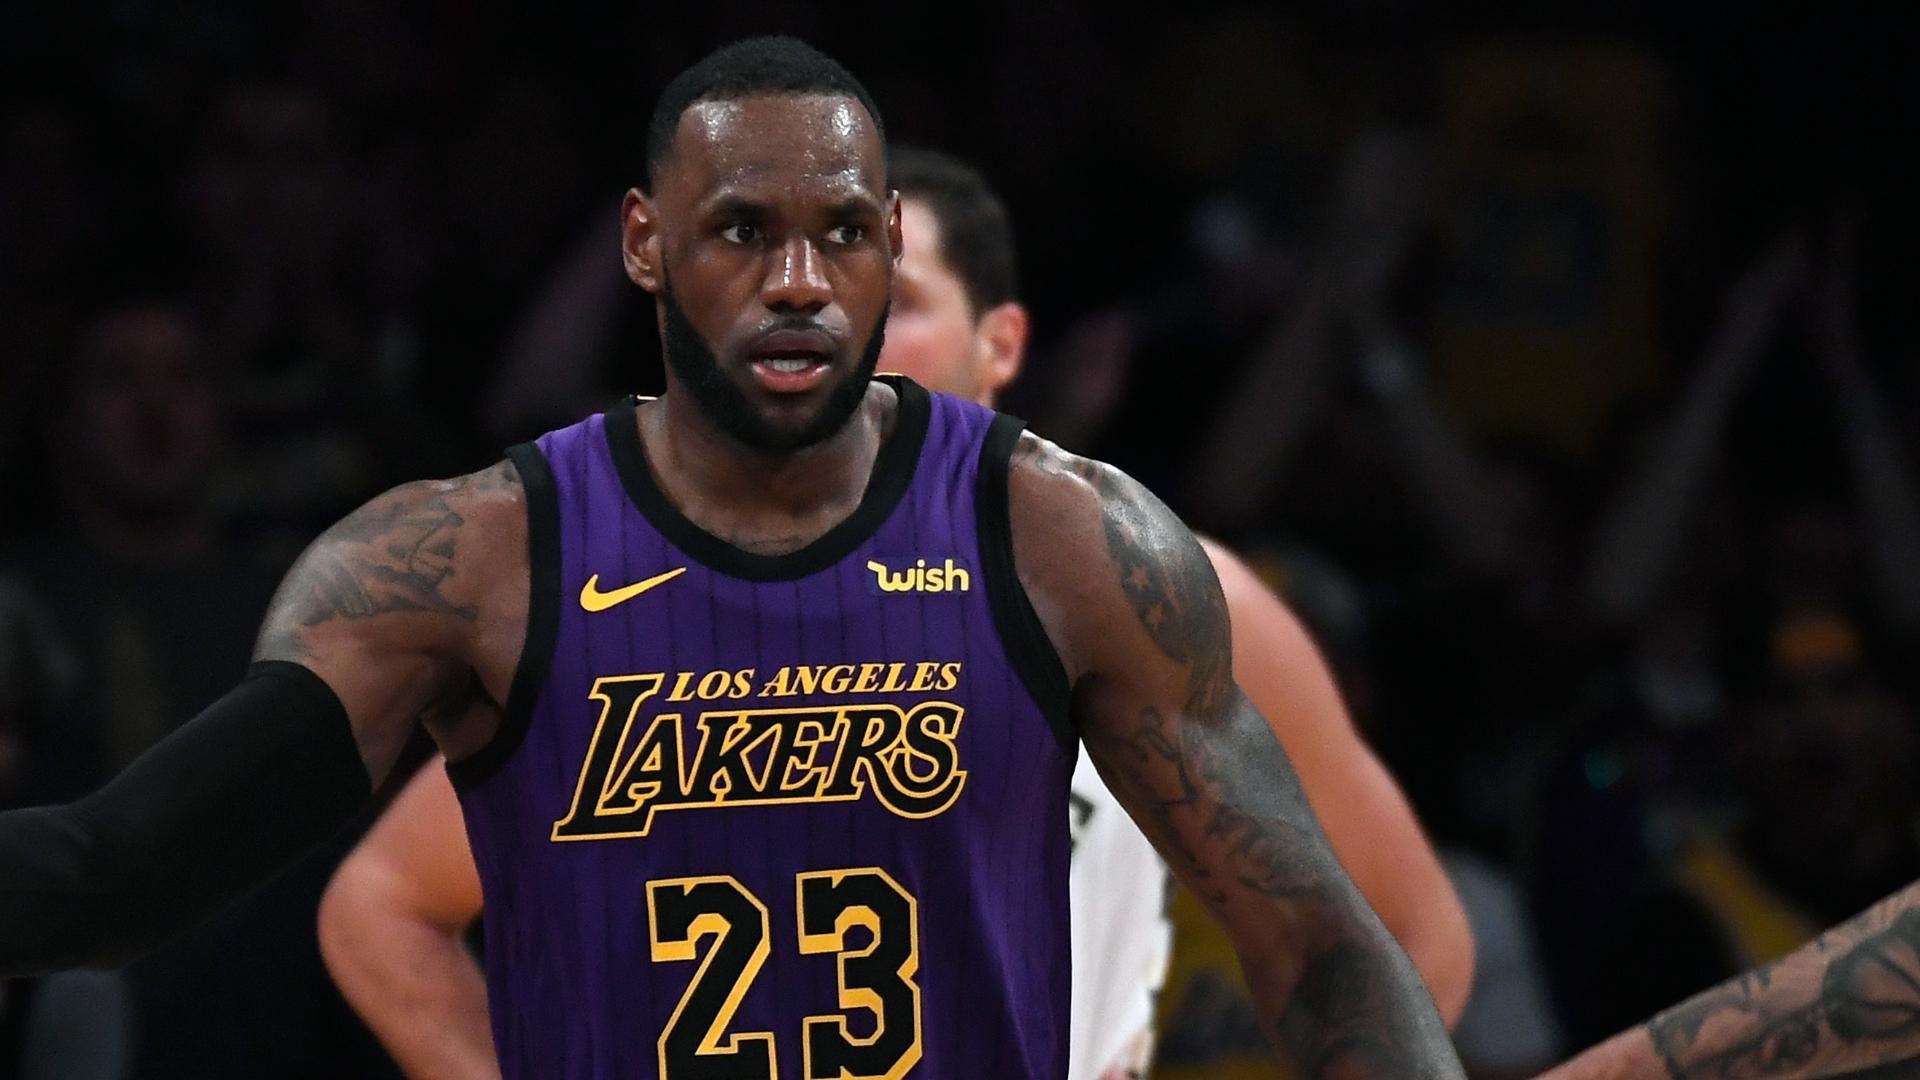 LeBron James Stats, News, Videos, Highlights, Pictures, Bio - Los Angeles Lakers - ESPN1920 x 1080